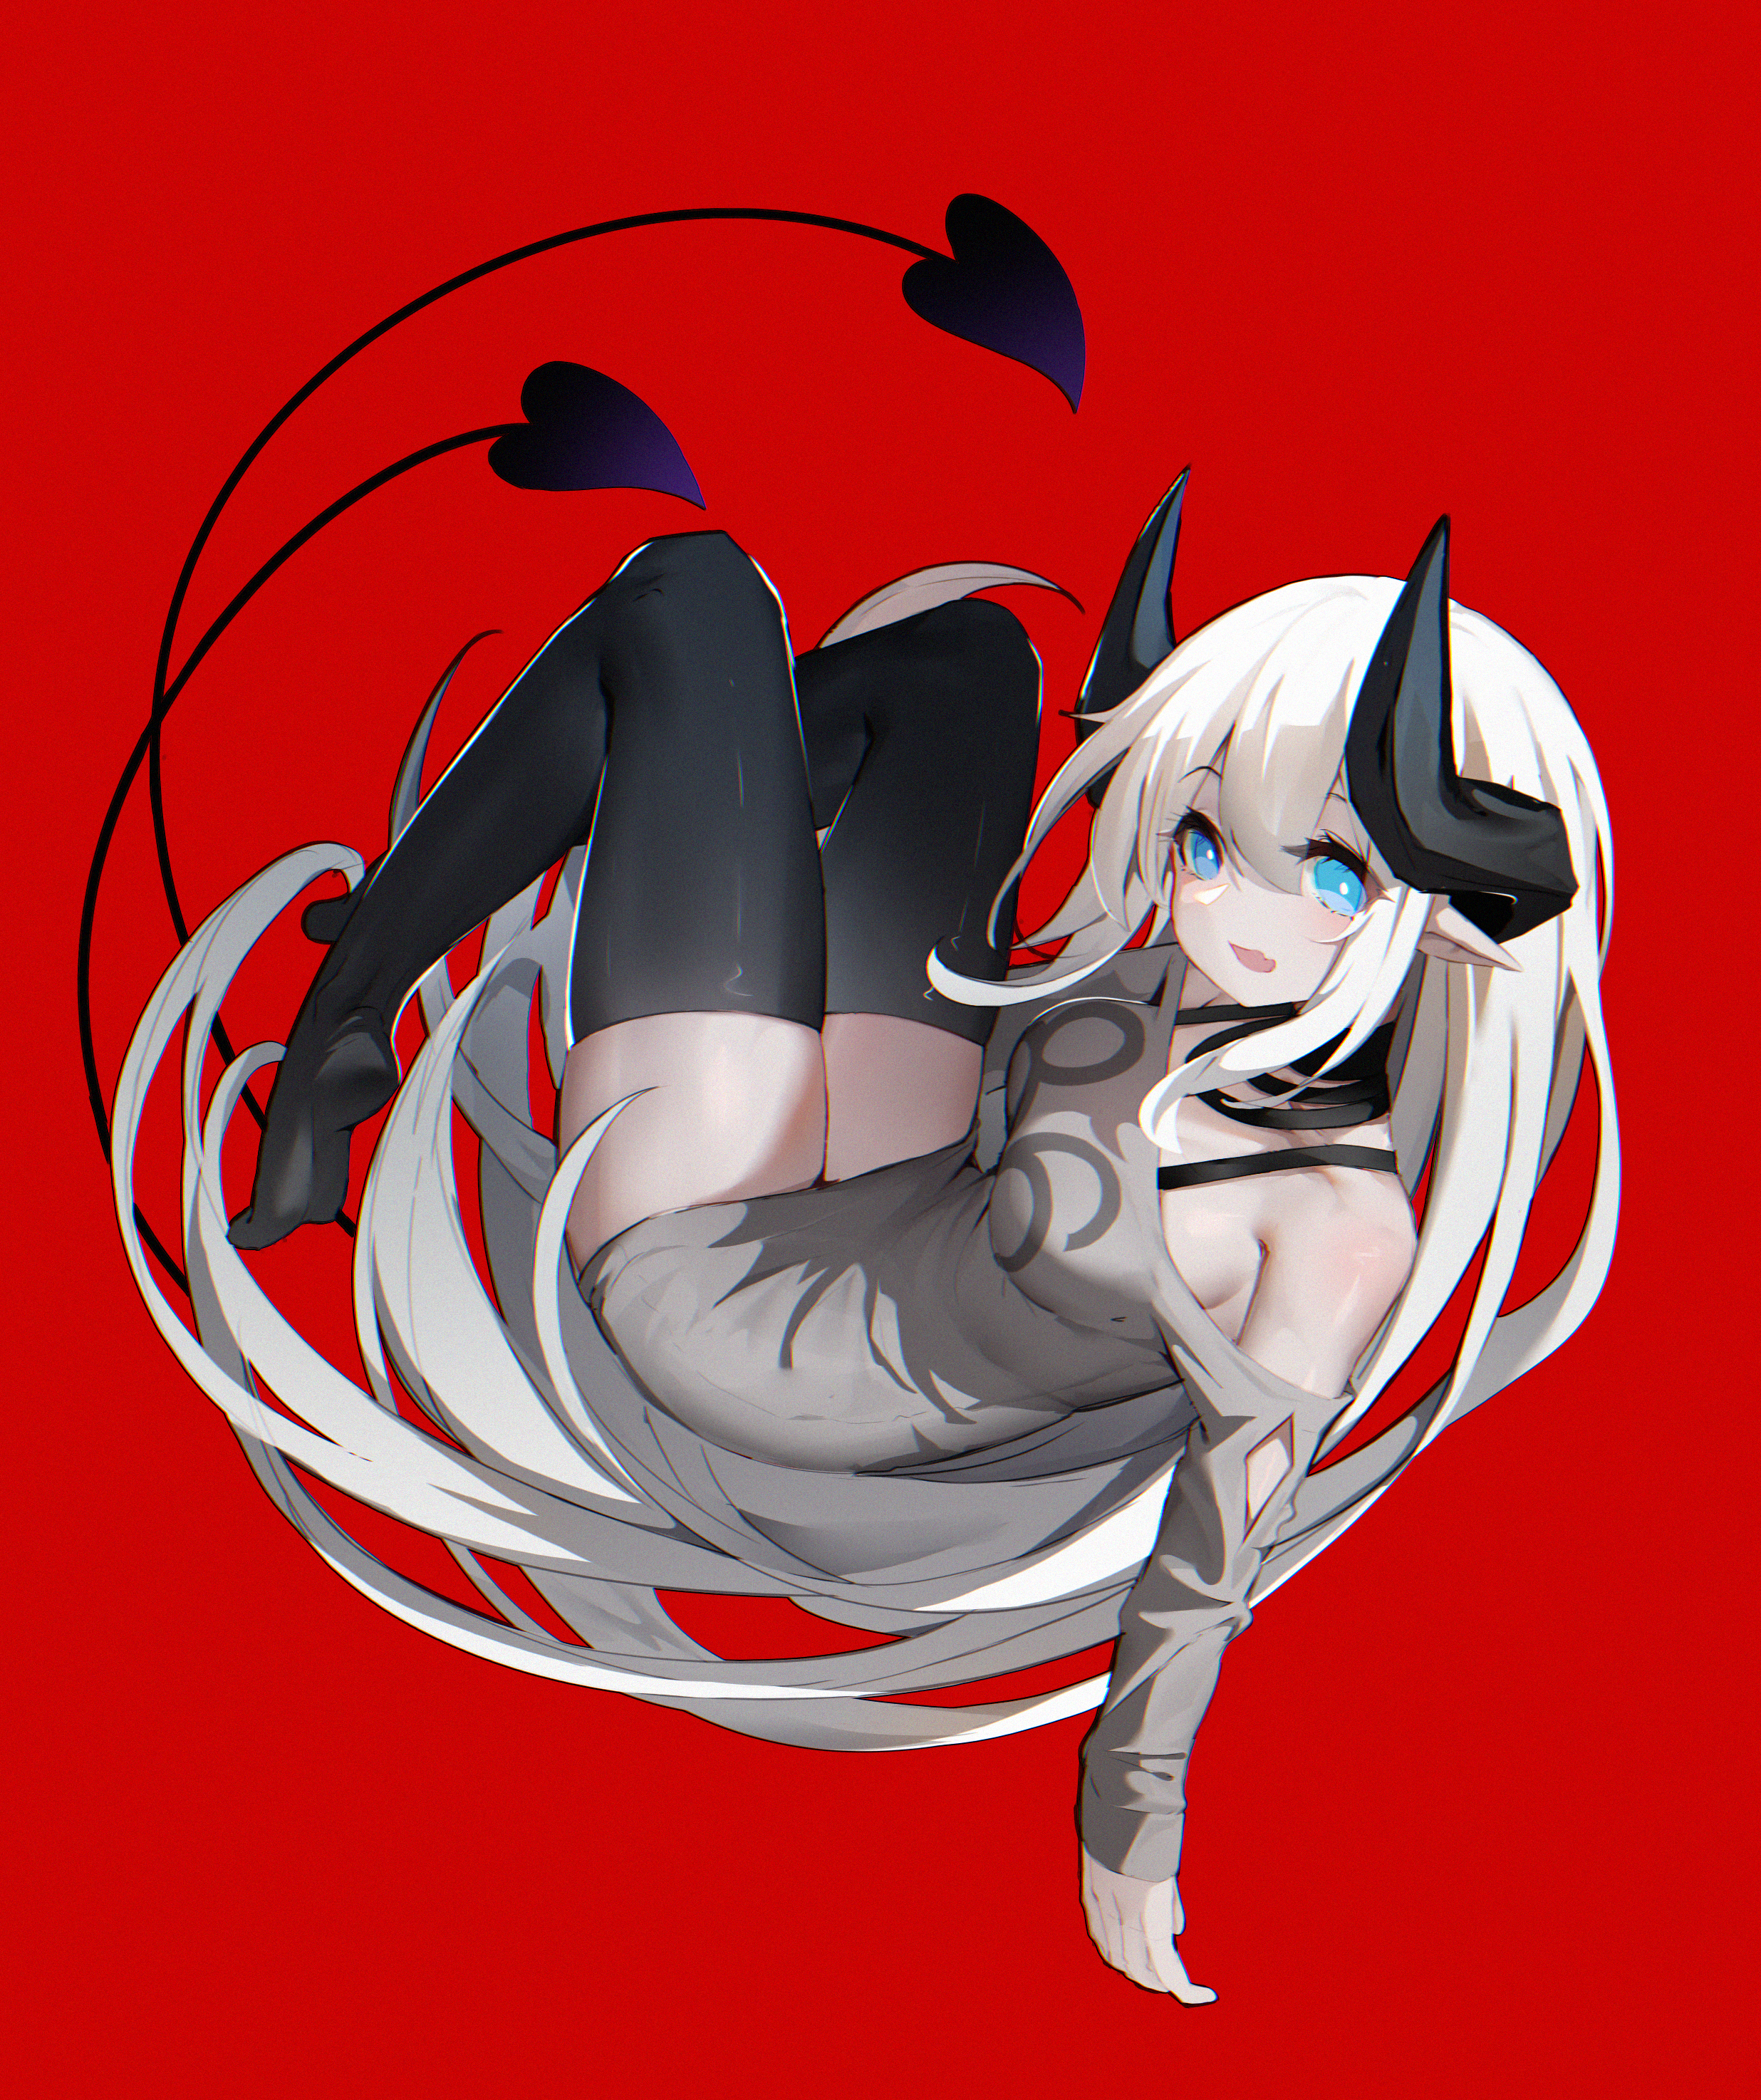 The Sound Of Painting Anime Anime Girls Vertical Demon Tail Demon Horns Pointy Ears Red Background S 2472x2948